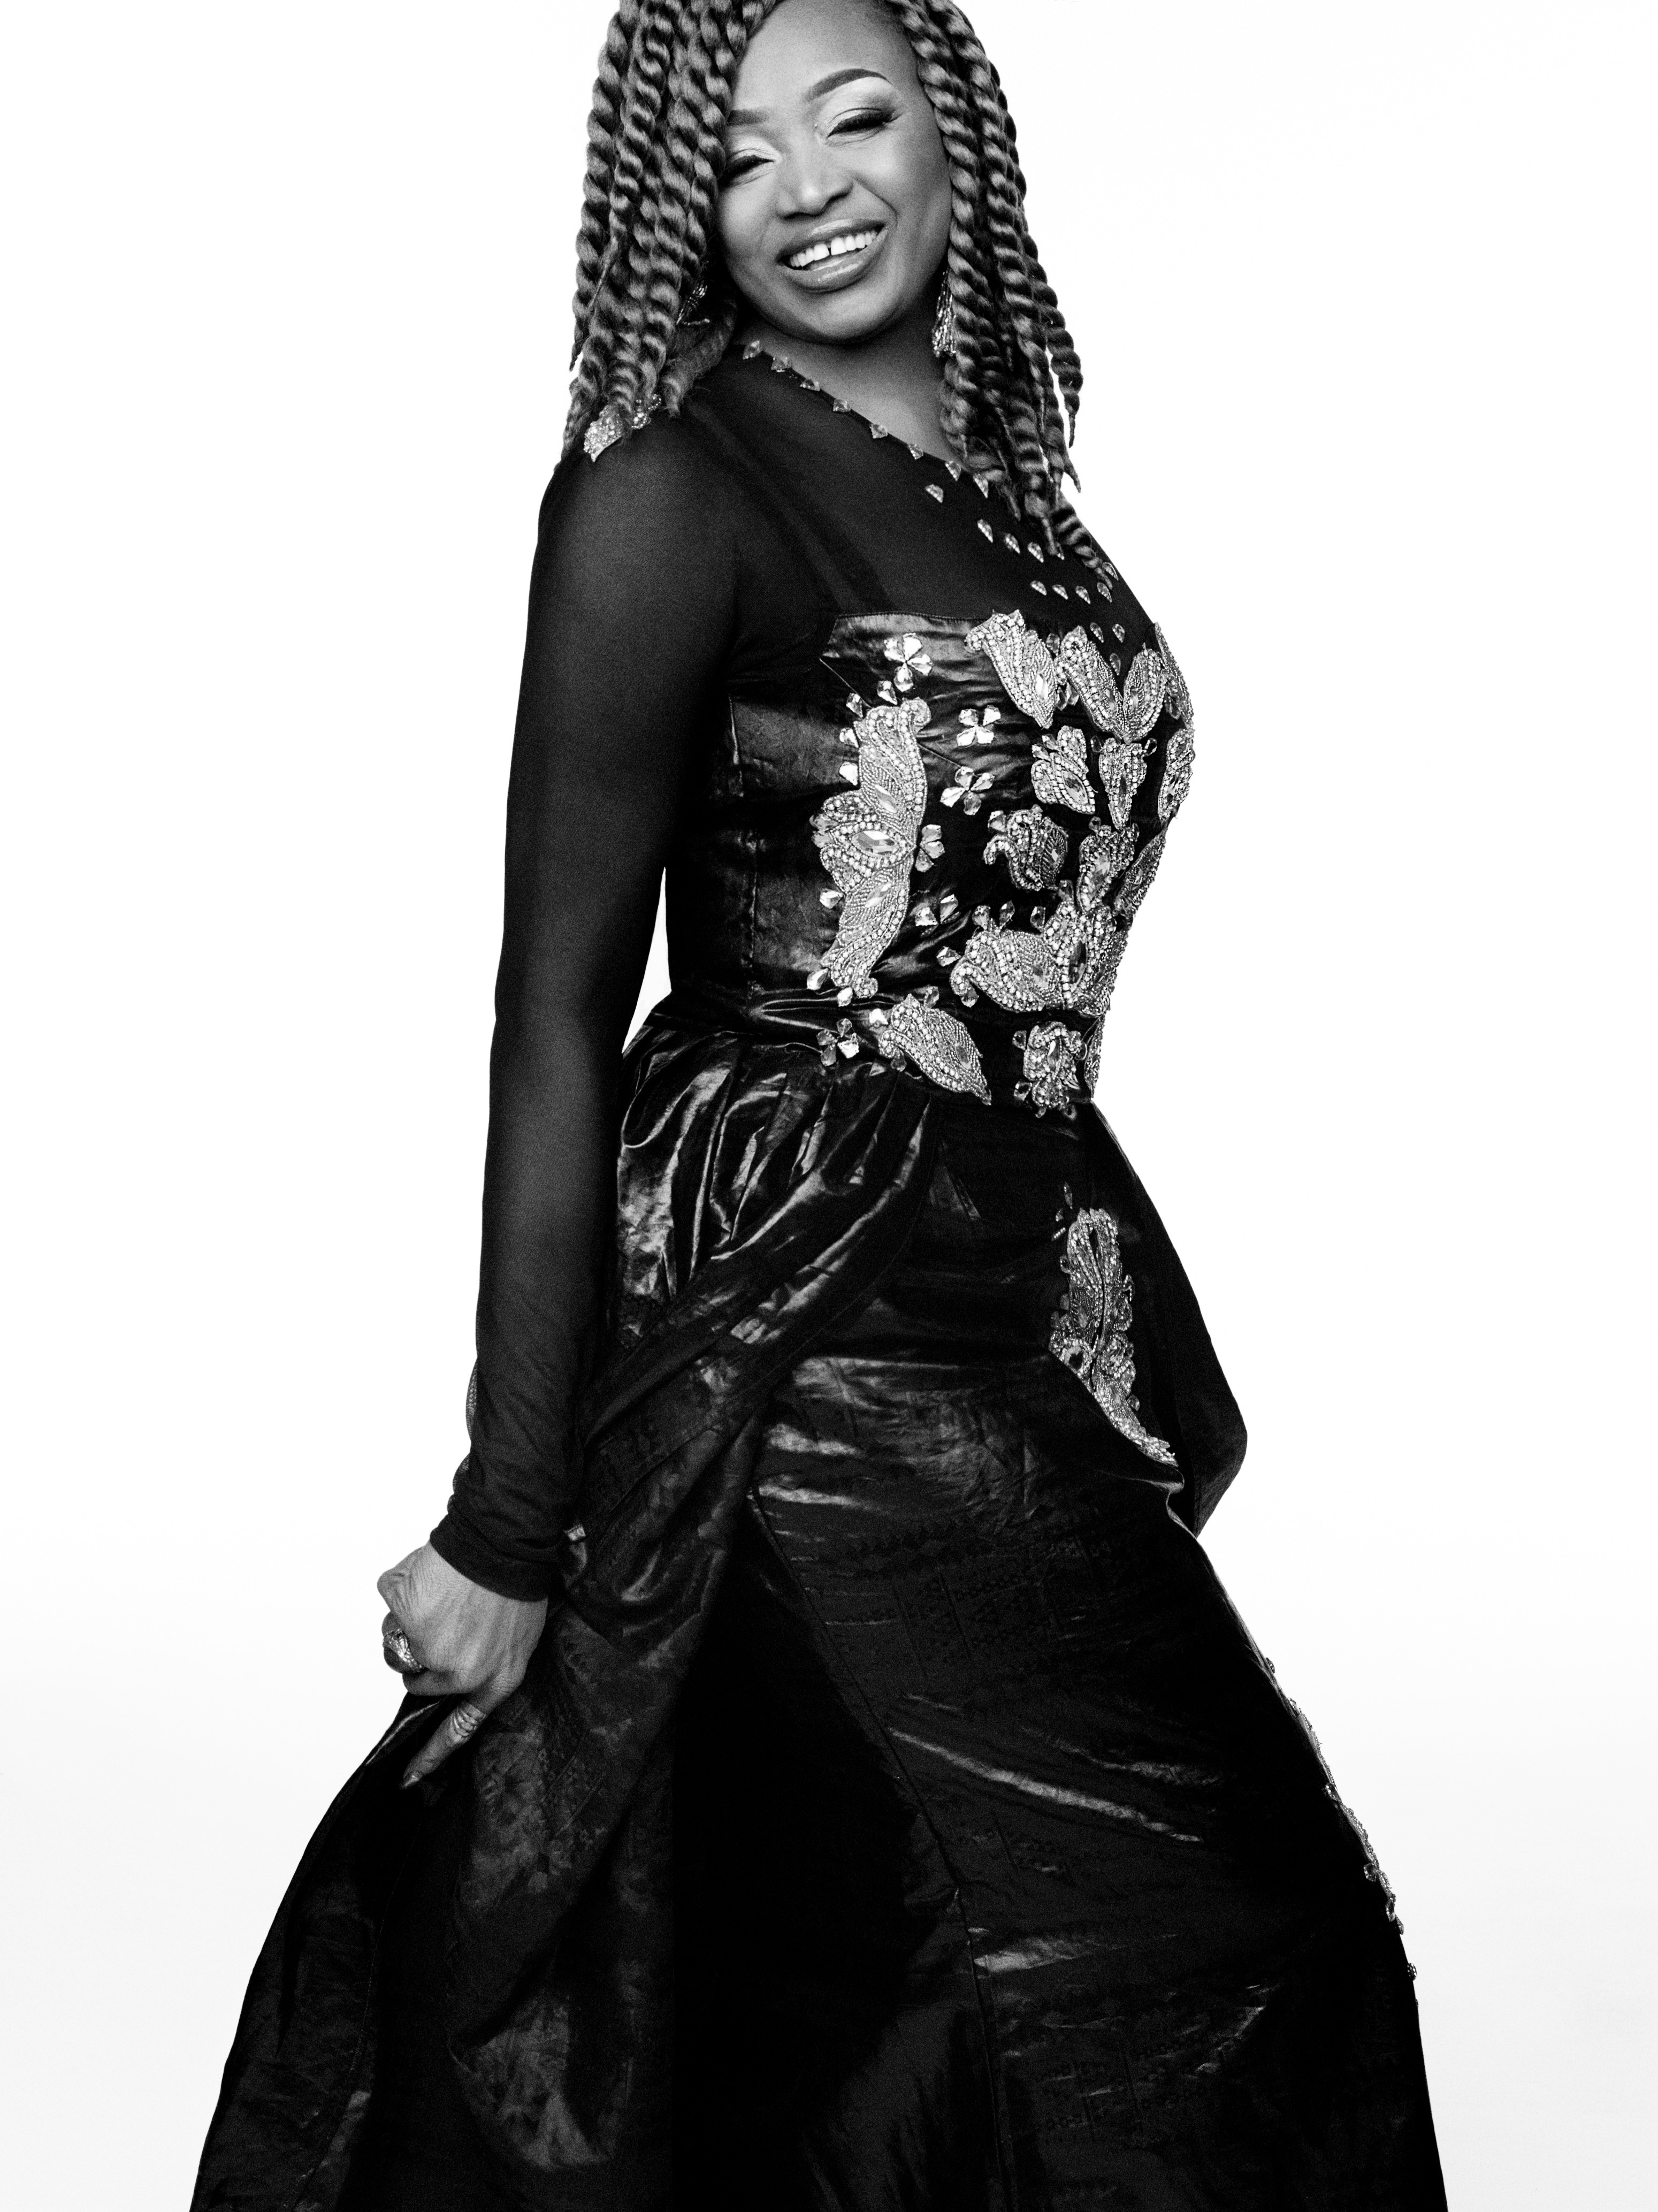 Oumou SangarÃ©, from Wassoulou to the dancefloors | INTERVIEW